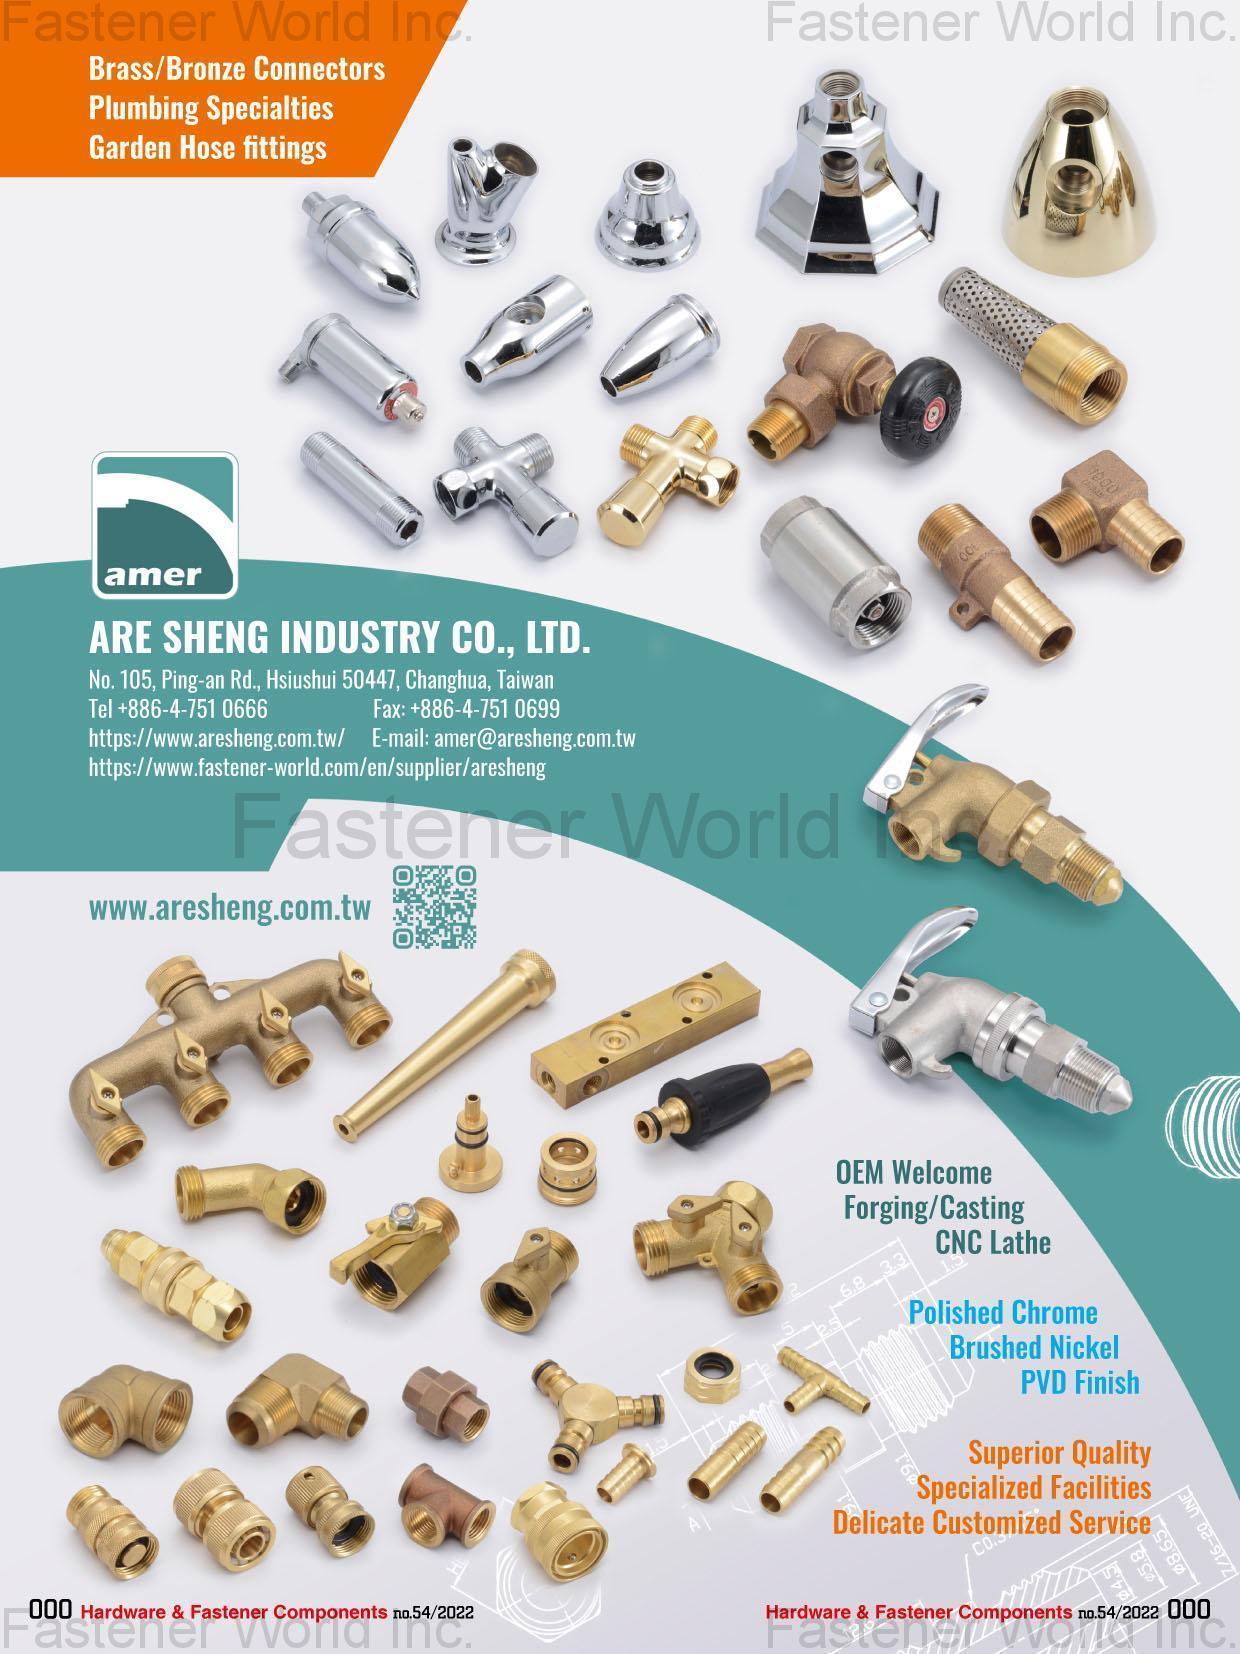 ARE SHENG INDUSTRY CO., LTD. , Brass/Bronze Connectors, Plumbing Specialties, Garden Hoase Fittings, Forging Casting CNC Lathe